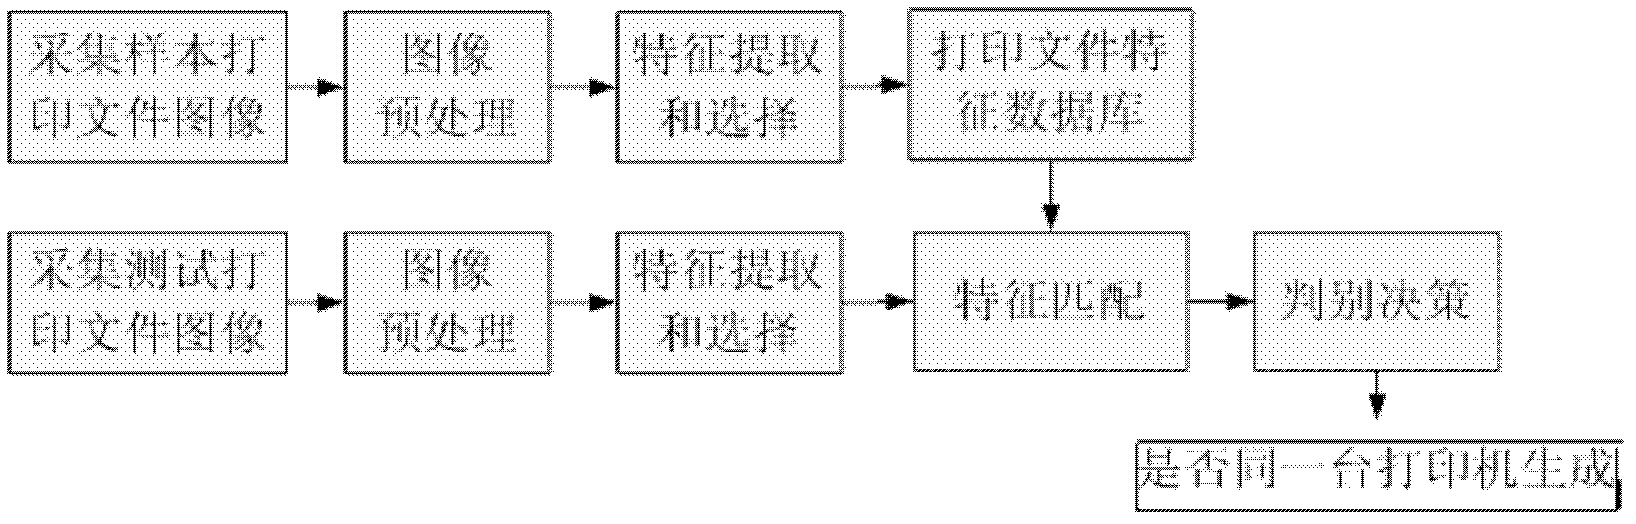 Identification method of printed documents based on texture analysis of toner accumulation